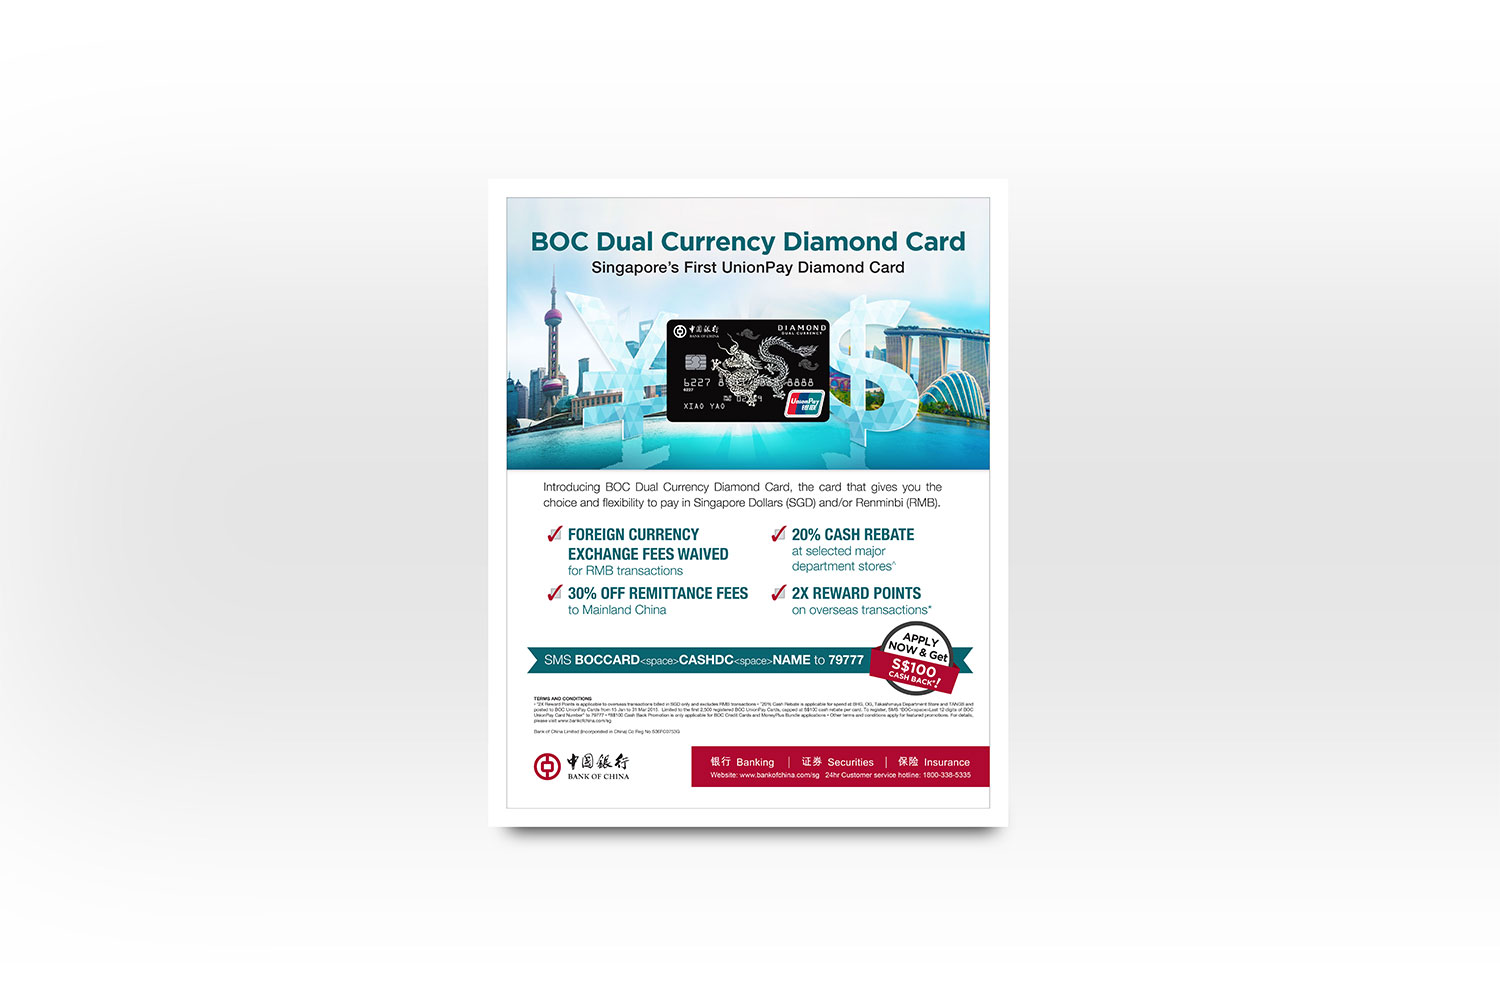 BOC Dual currency Diamond card poster